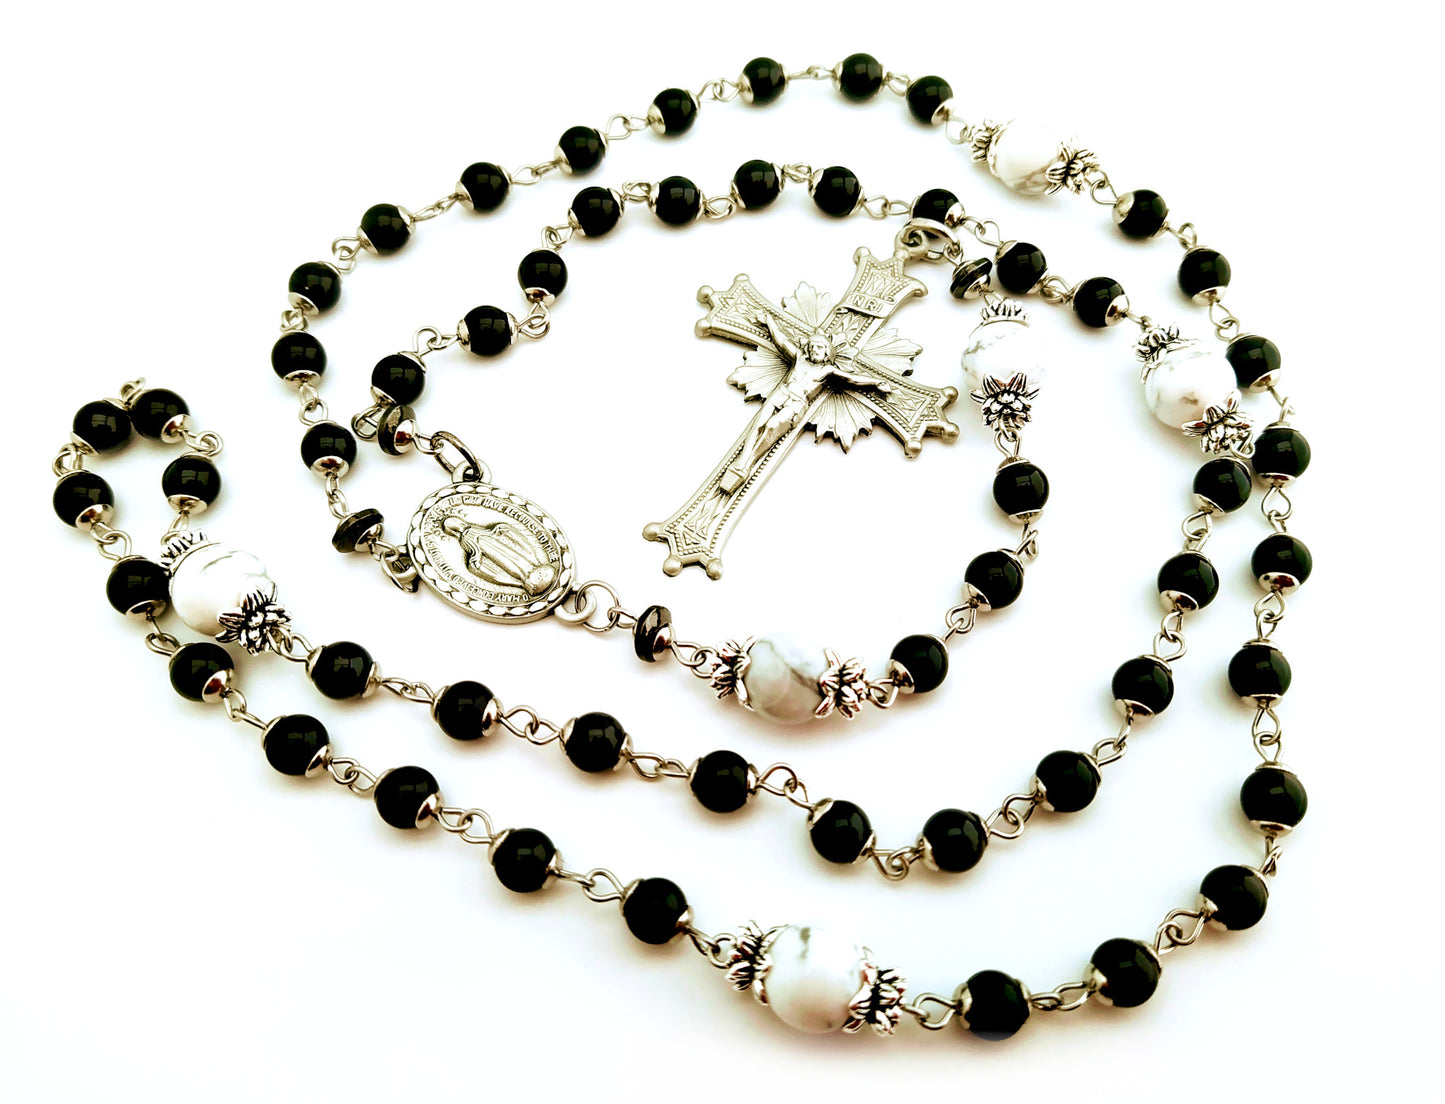 Miraculous medal unique rosary beads with black onyx and howlite beads, silver crucifix and centre medal.